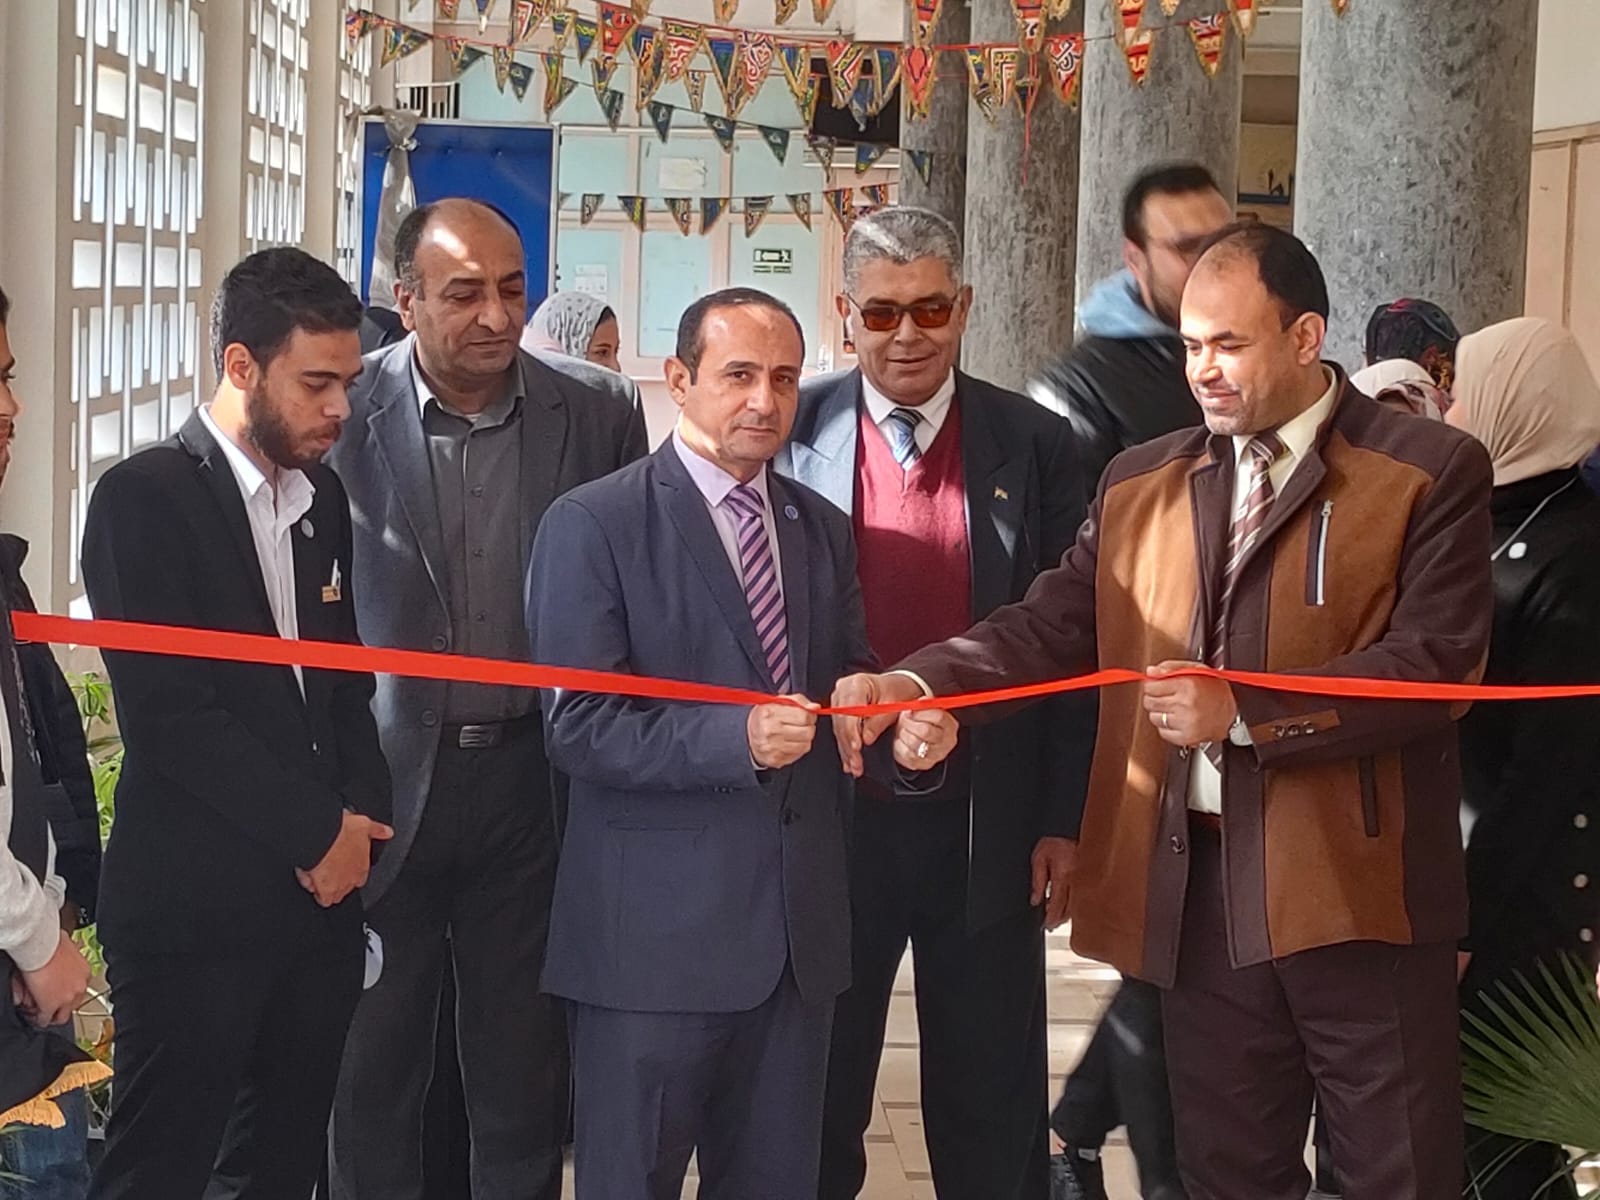 The Student Union organized a celebration on the occasion of welcoming the new year 2023